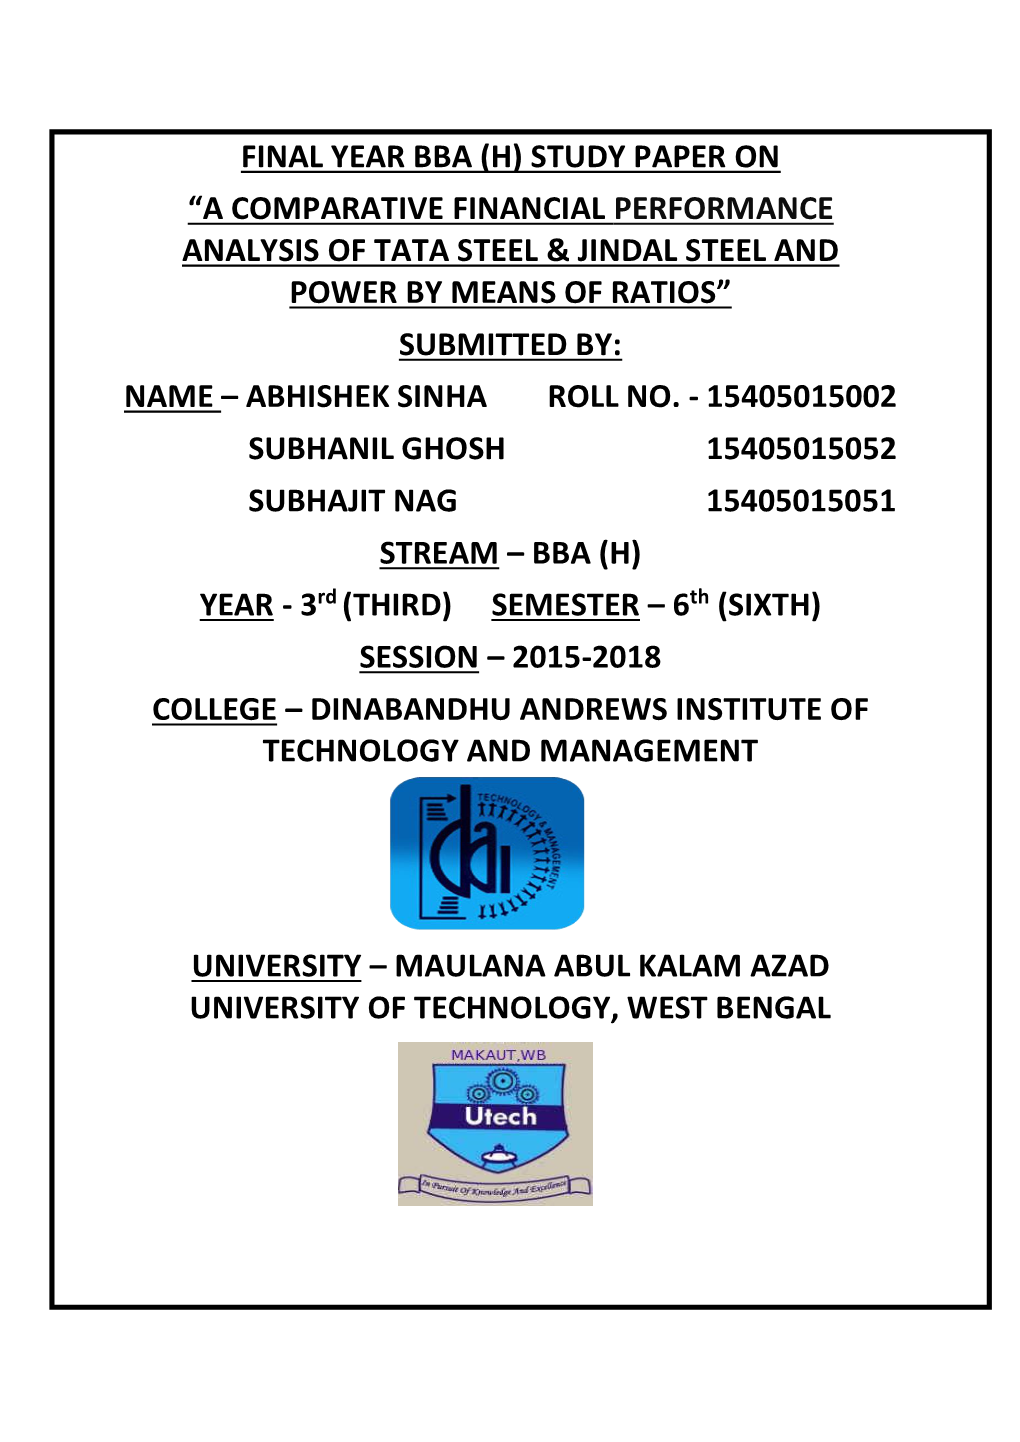 A Comparative Financial Performance Analysis of Tata Steel & Jindal Steel and Power by Means of Ratios” Submitted By: Name – Abhishek Sinha Roll No